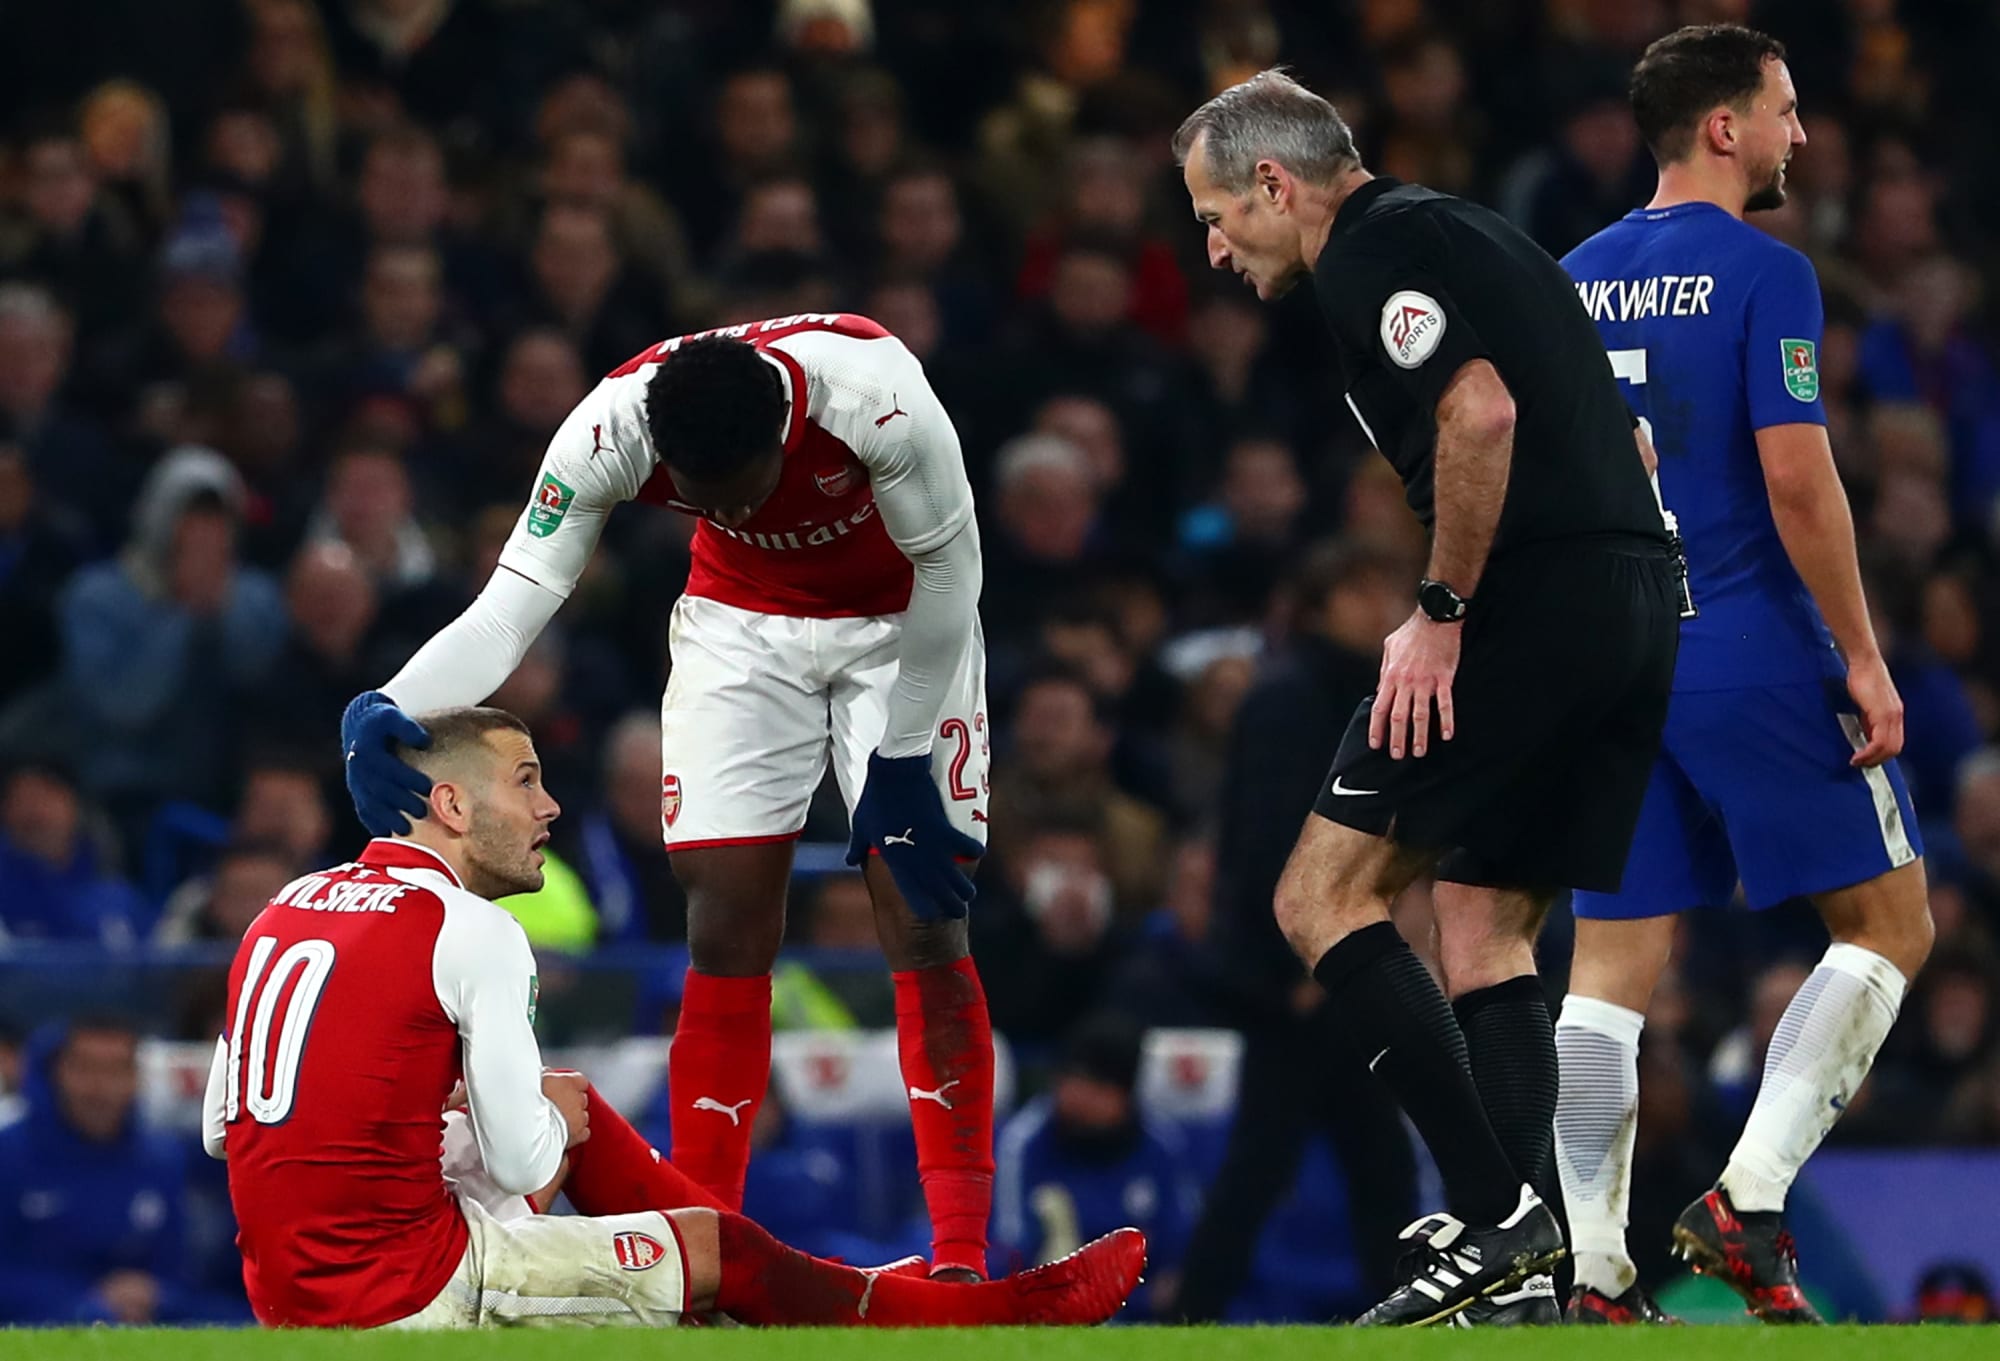 Arsenal Vs Chelsea: Highlights and analysis - Intriguing draw